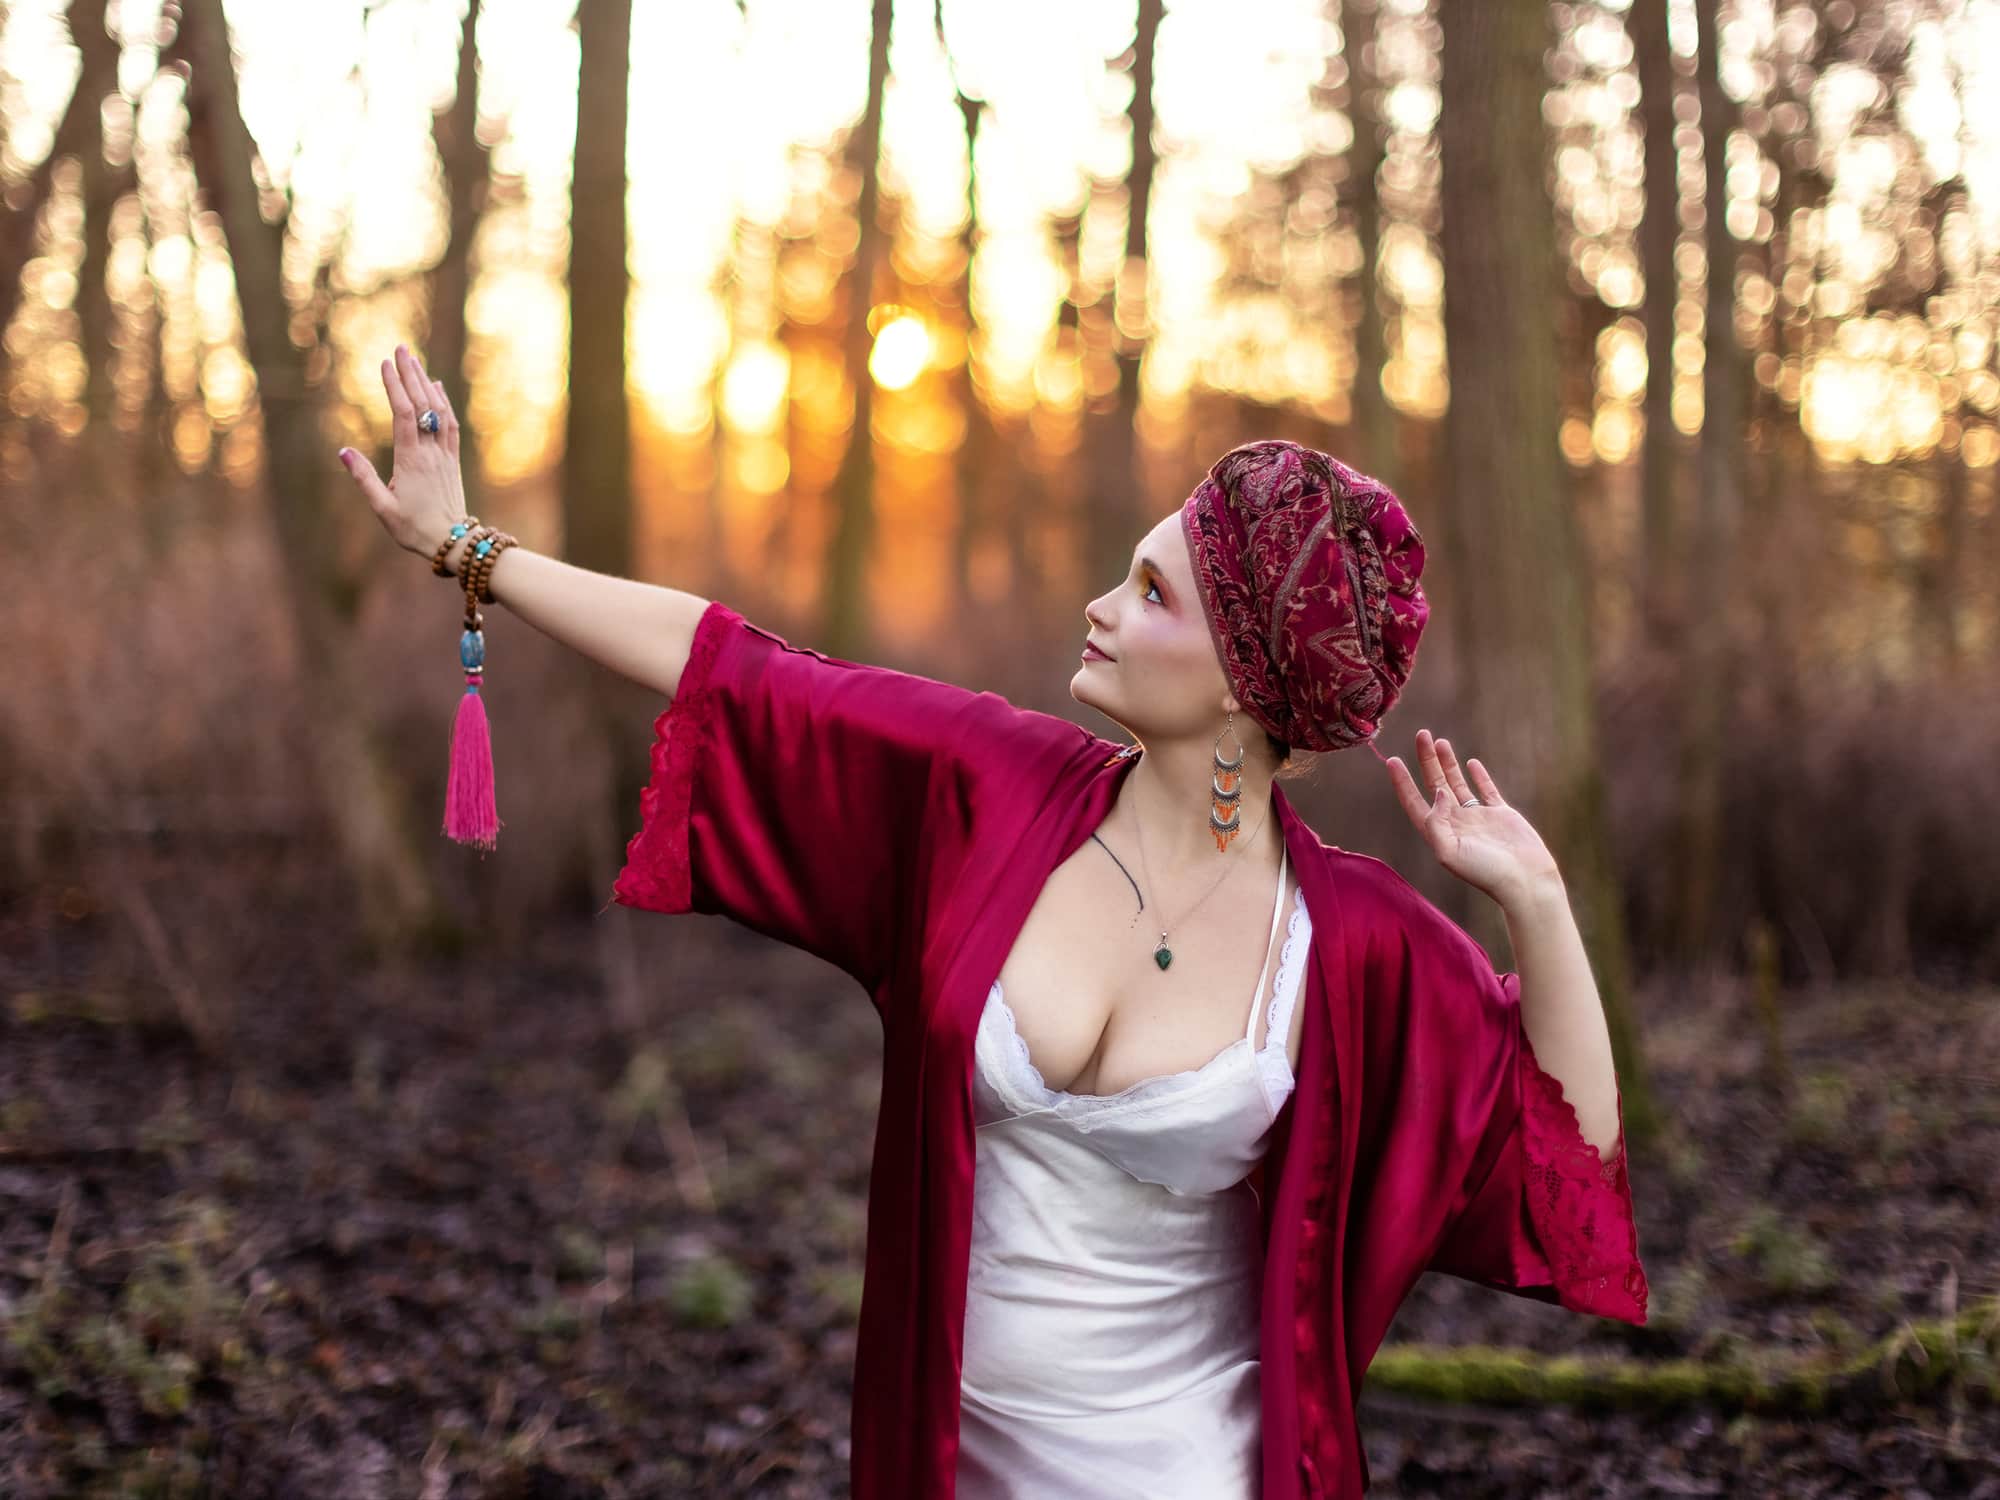 Priestess in a white satin nightdress and head scarf dances in the woods as the sun goes down